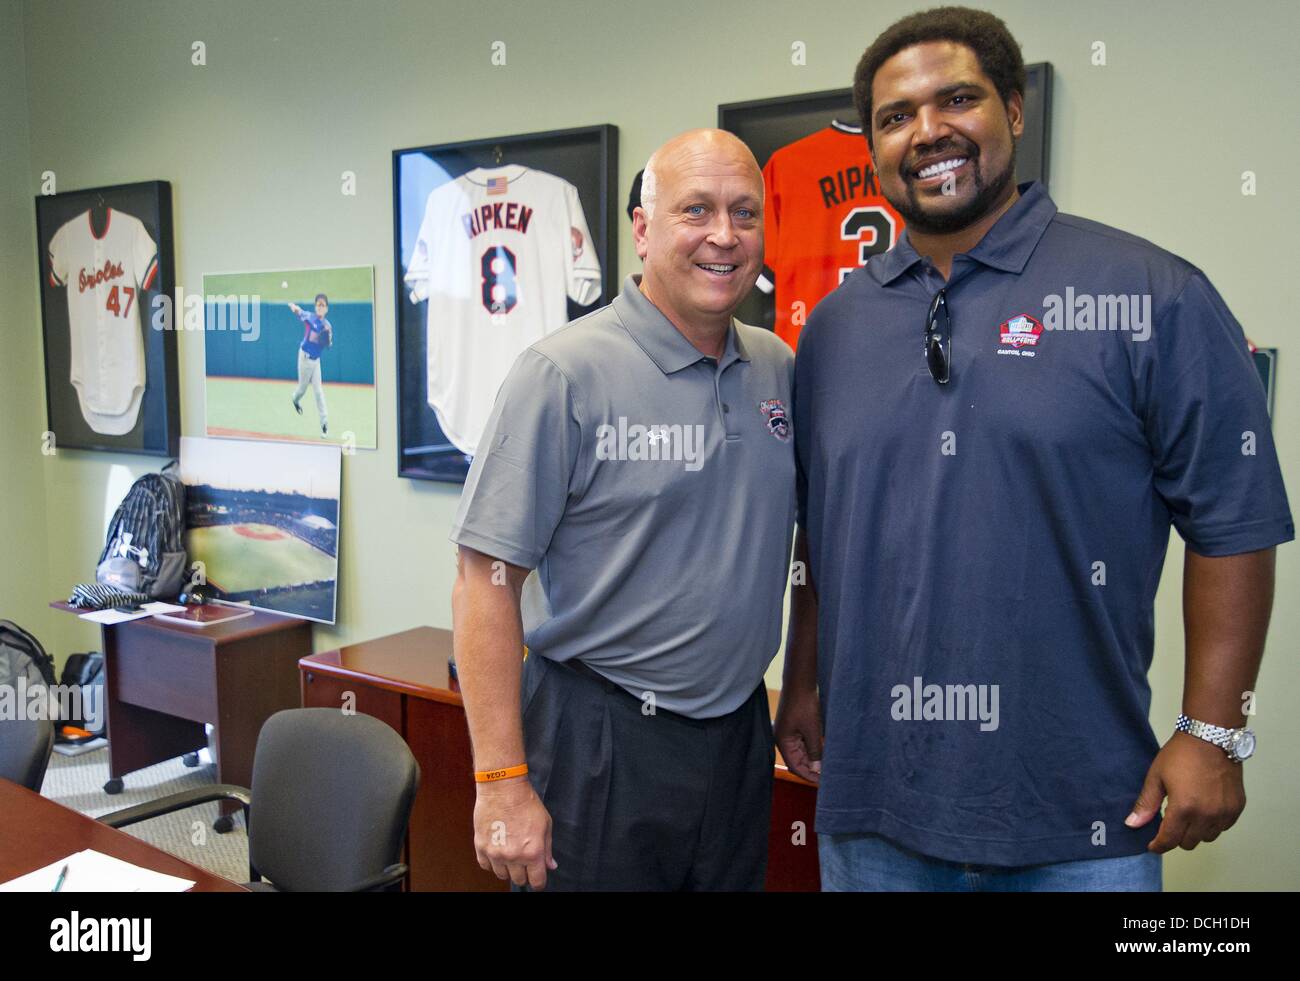 Aug. 17, 2013 - Aberdeen, Maryland, U.S. - Cal Ripken, Jr. and Jonathan Ogden, both Hall of Famers in their respective sports, before games begin on Playoff Championship Day at the Cal Ripken World Series in Aberdeen, Maryland on August 17, 2013. (Credit Image: © Scott Serio/Eclipse/ZUMAPRESS.com) Stock Photo